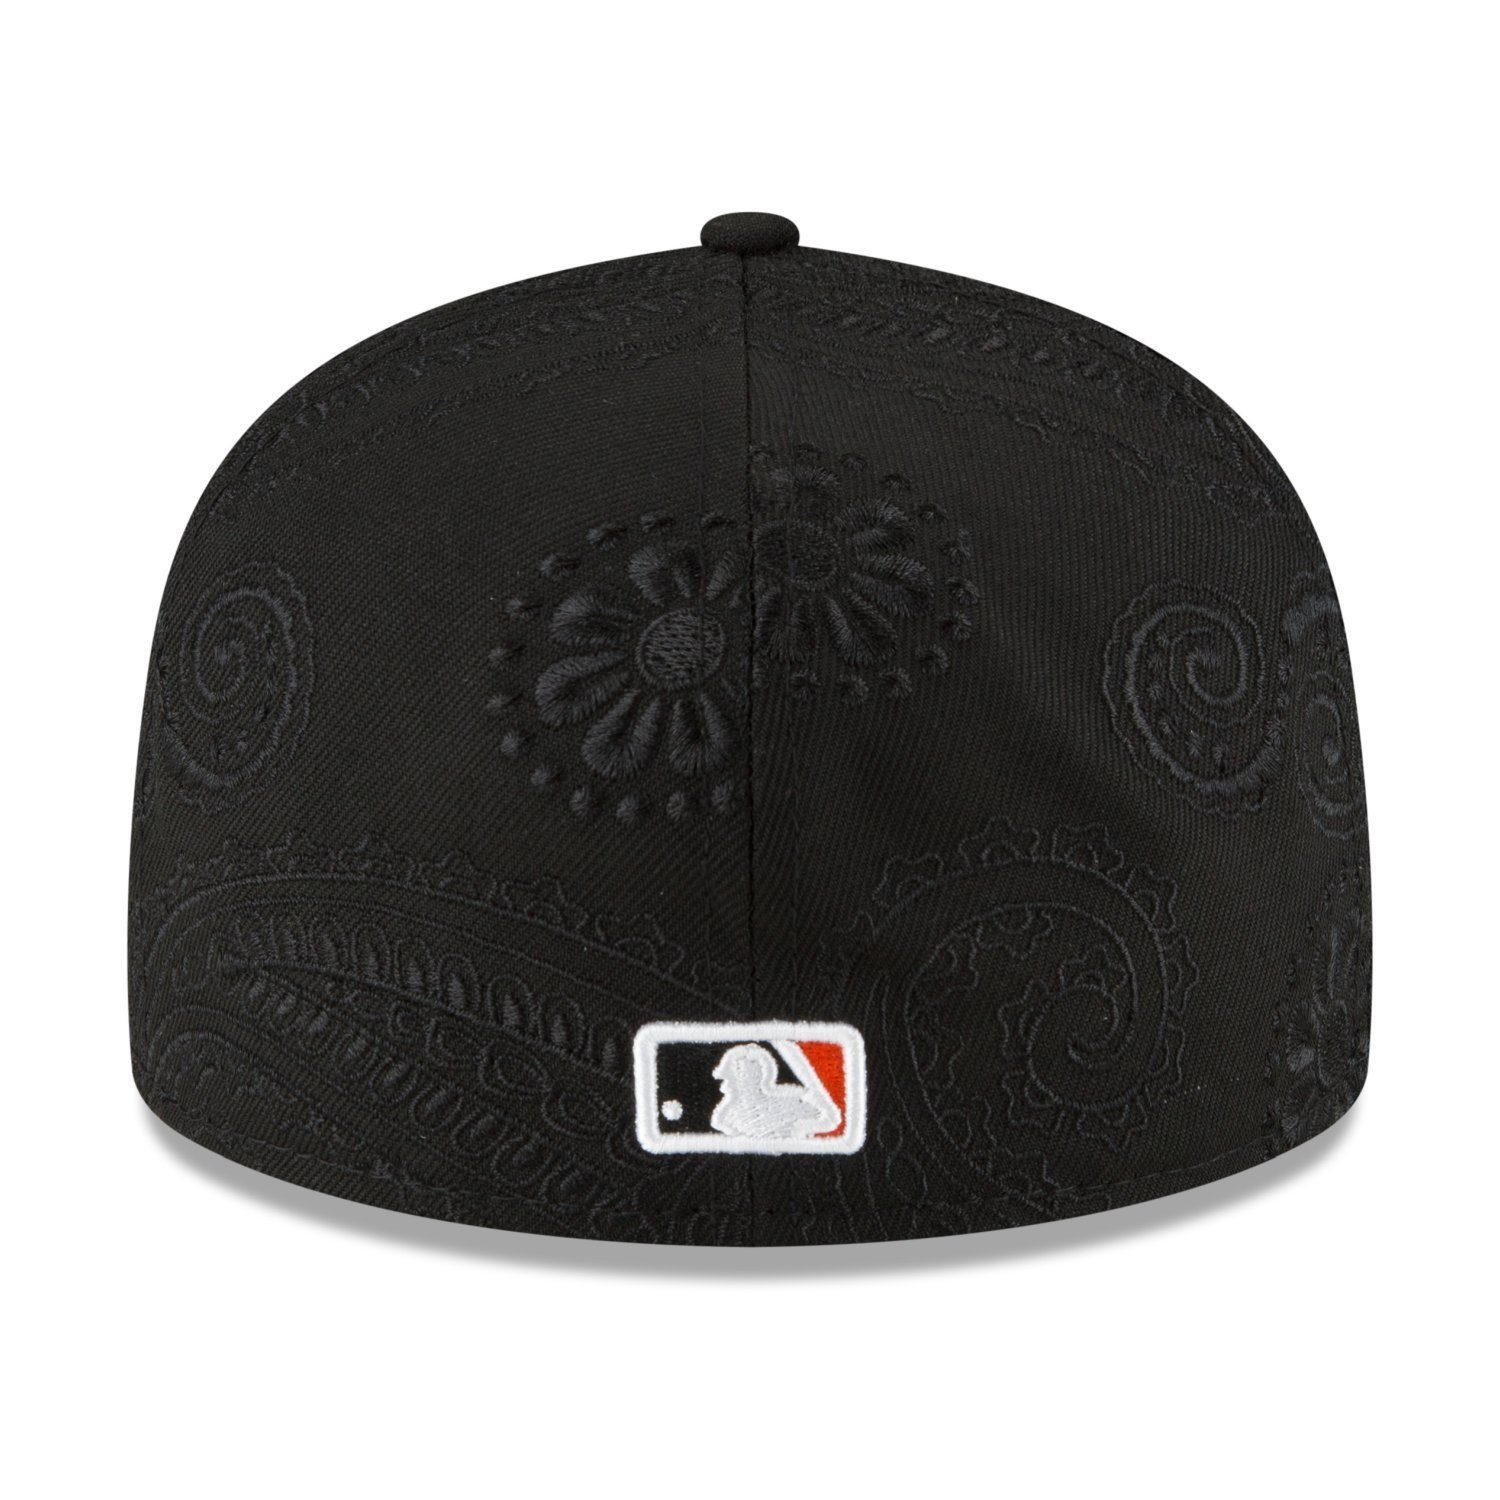 PAISLEY Fitted Giants Cap SWIRL Era New San Francisco 59Fifty